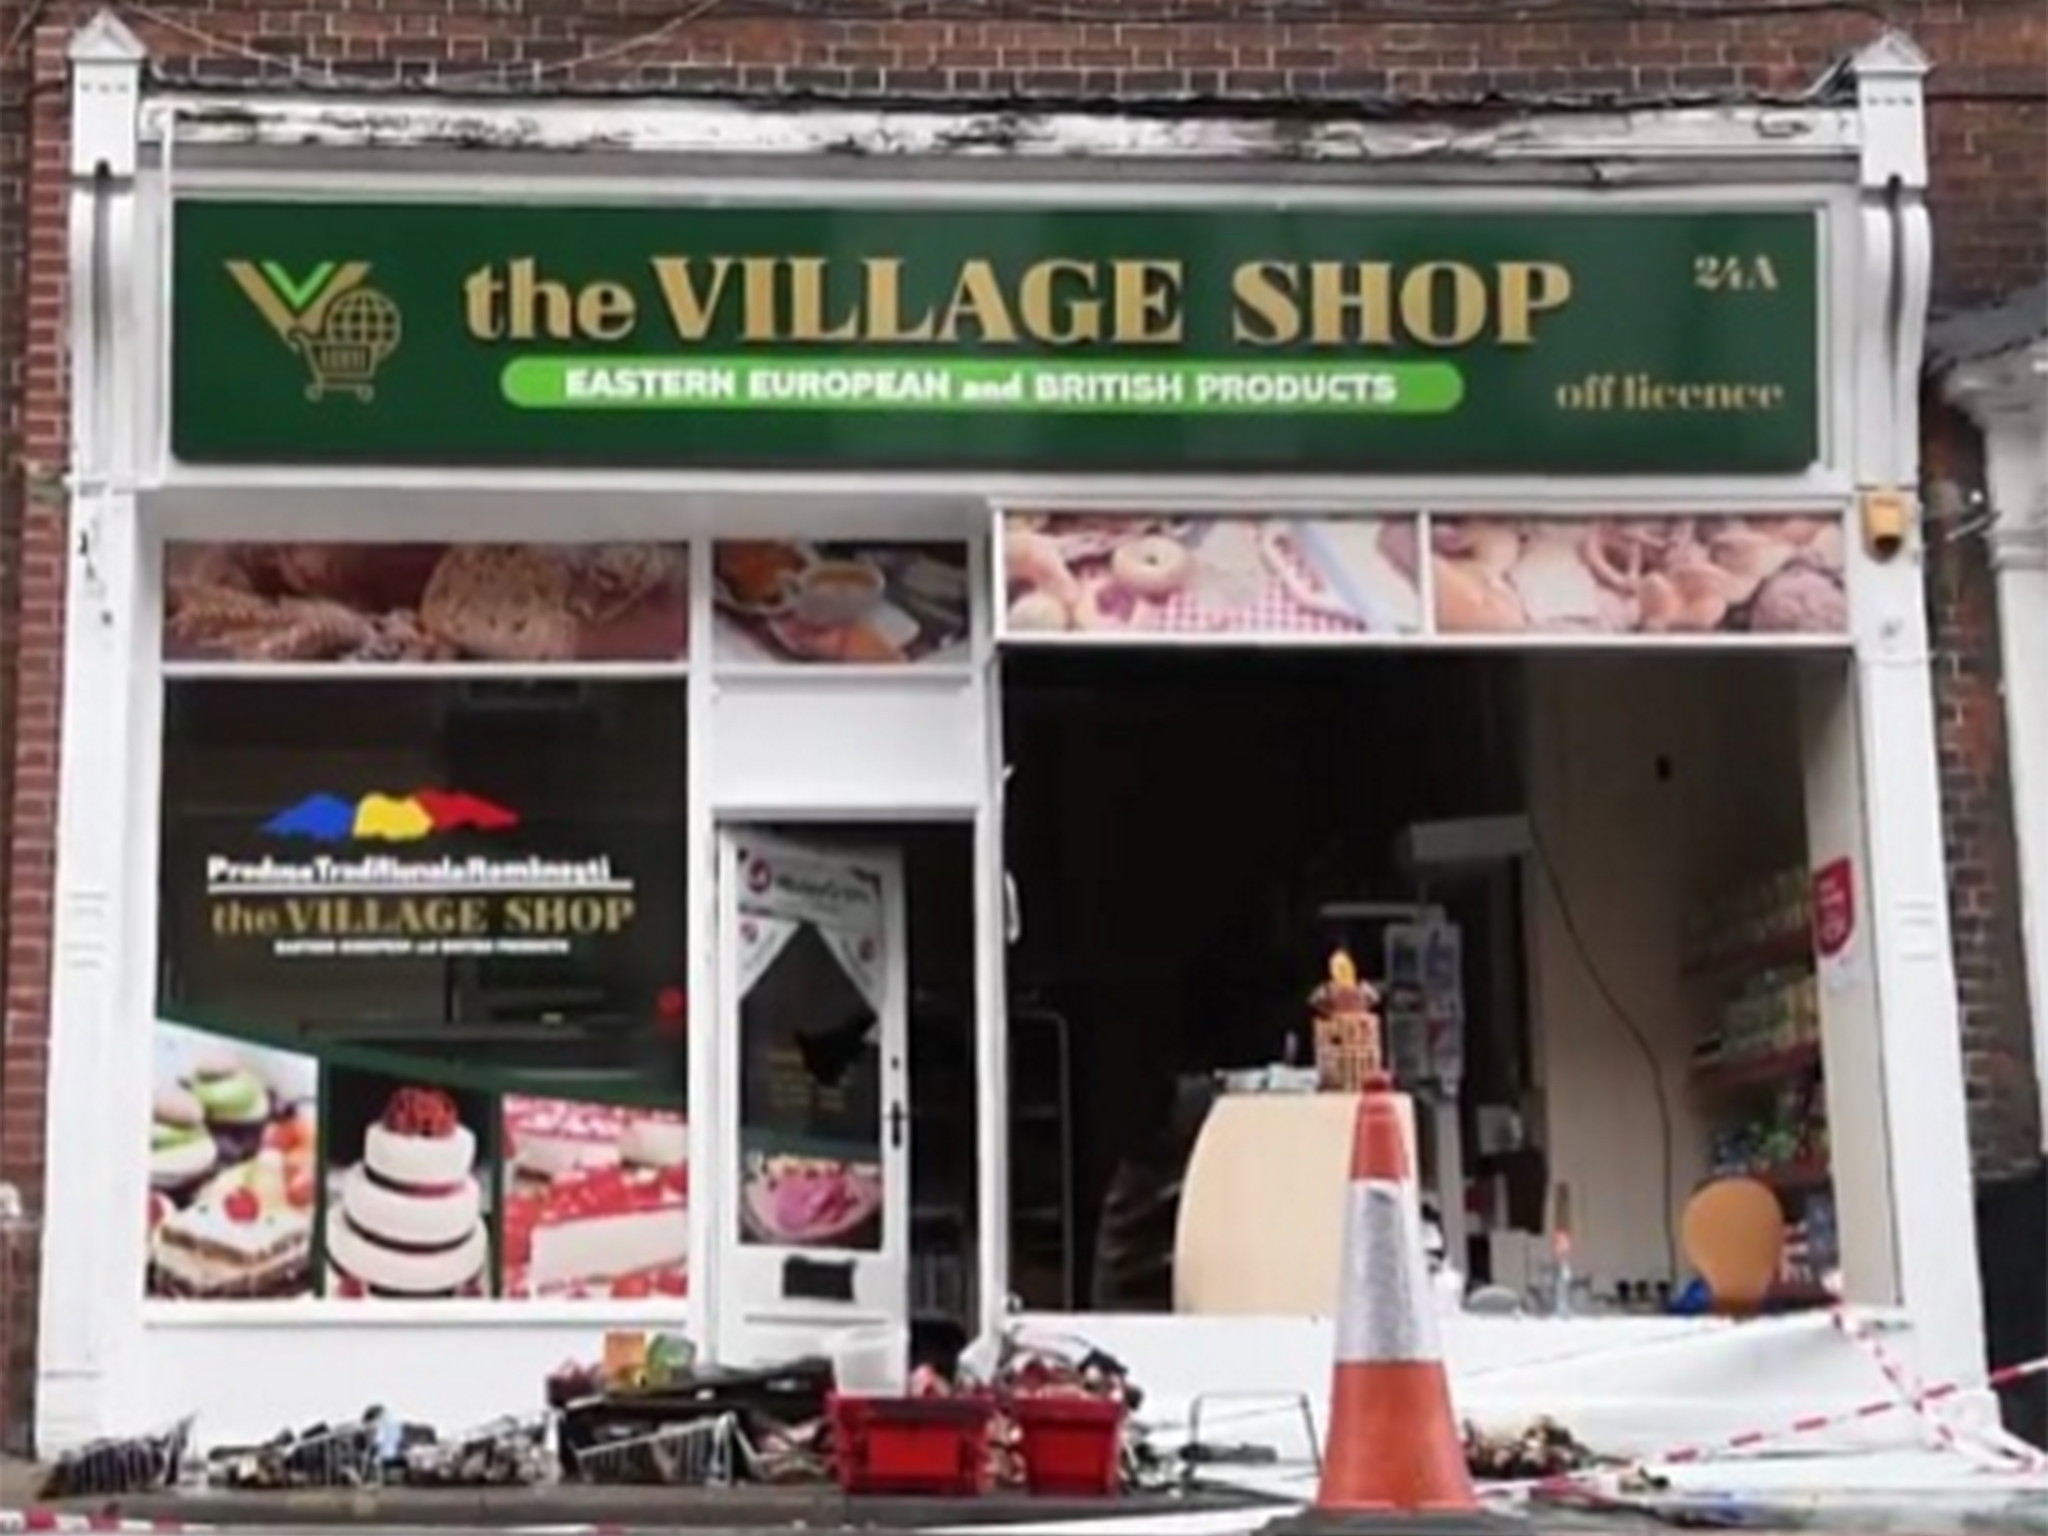 A worker at this Romanian food shop in Norwich was asleep upstairs when arsonists attacked it in the early hours of July 8